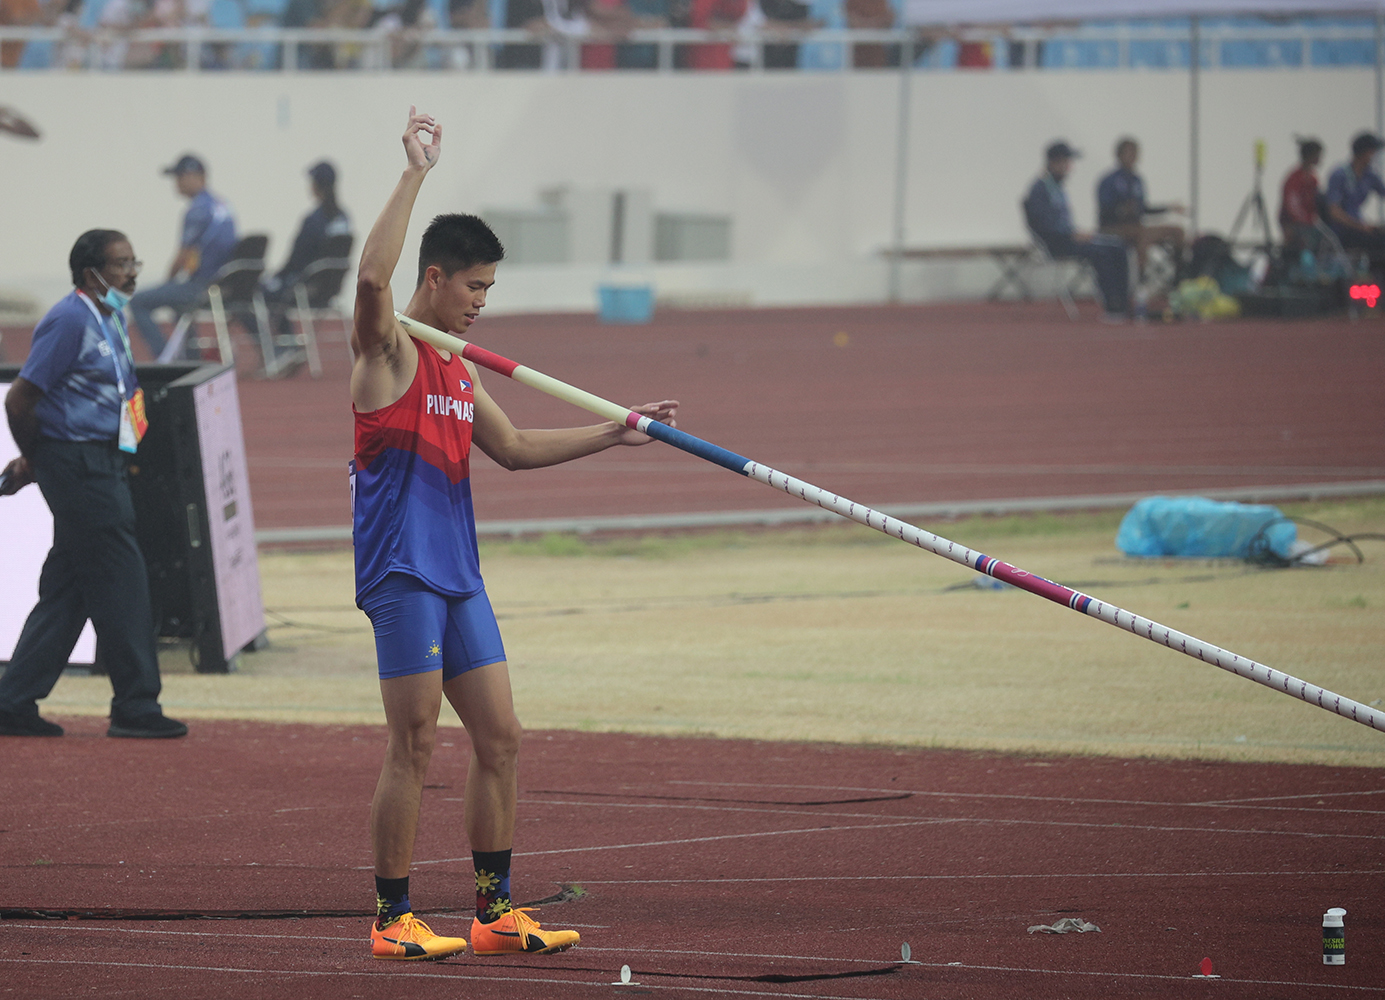 EJ Obiena wins another pole vault gold in the SEA Games. SEA GAMES POOL PHOTO